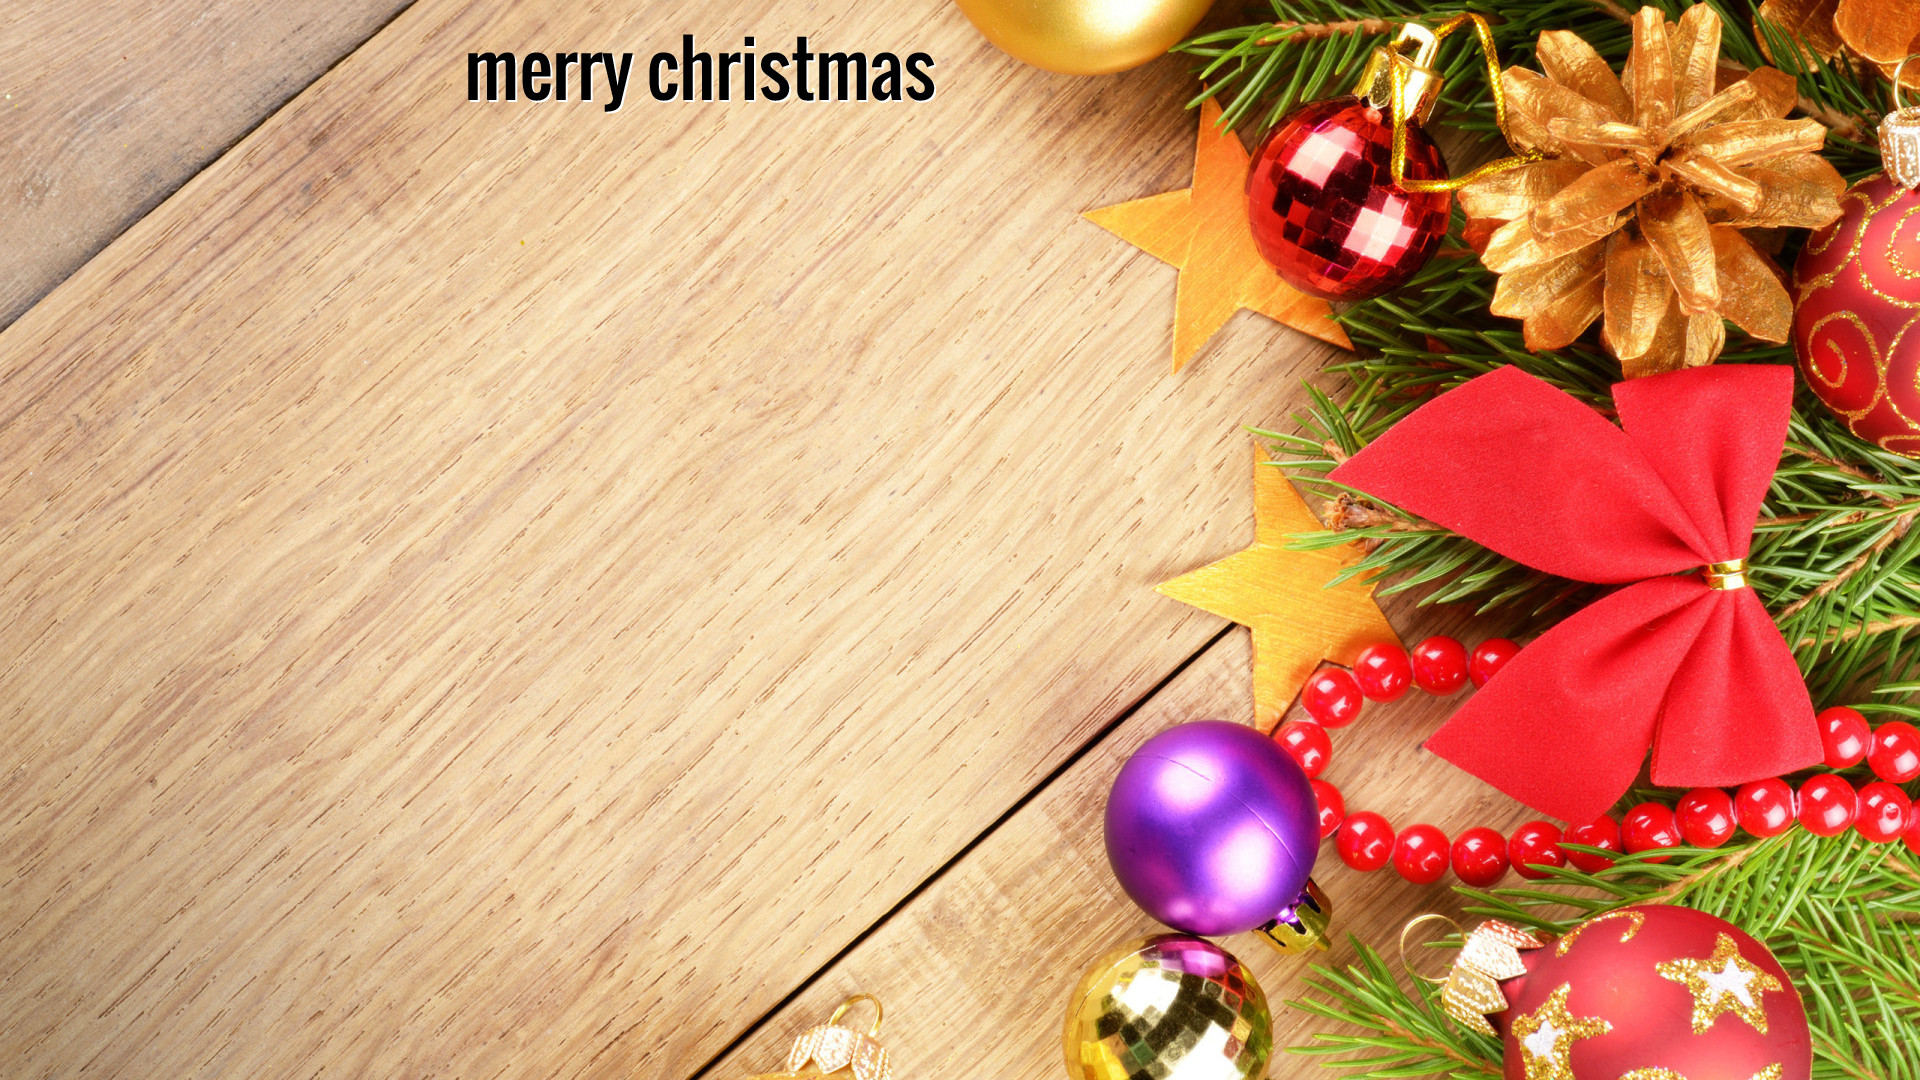 1920x1080 new merry christmas wallpapers for 2013